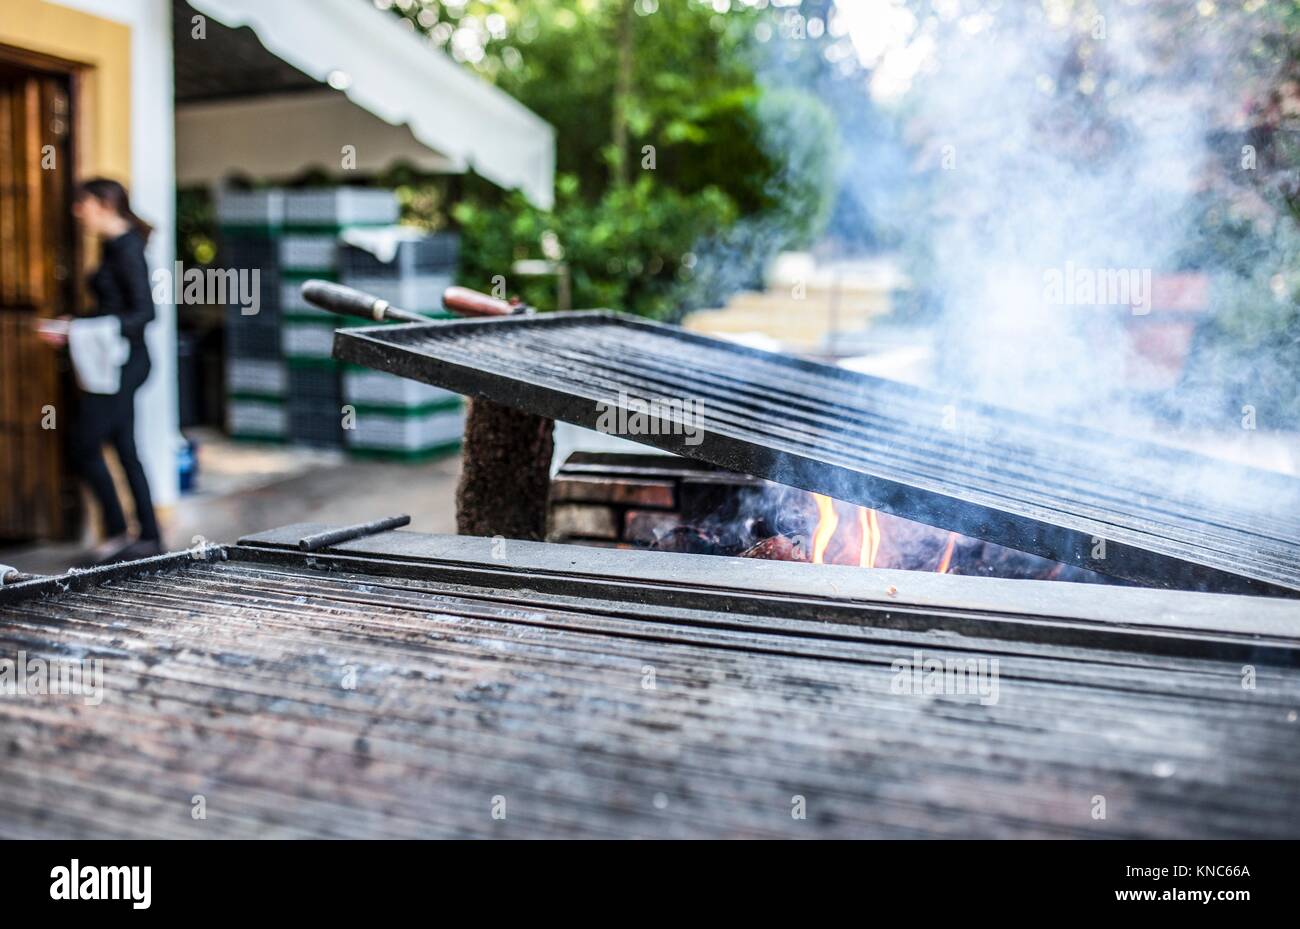 Grill heating up ready to start cooking. Outdoors restaurant. Stock Photo